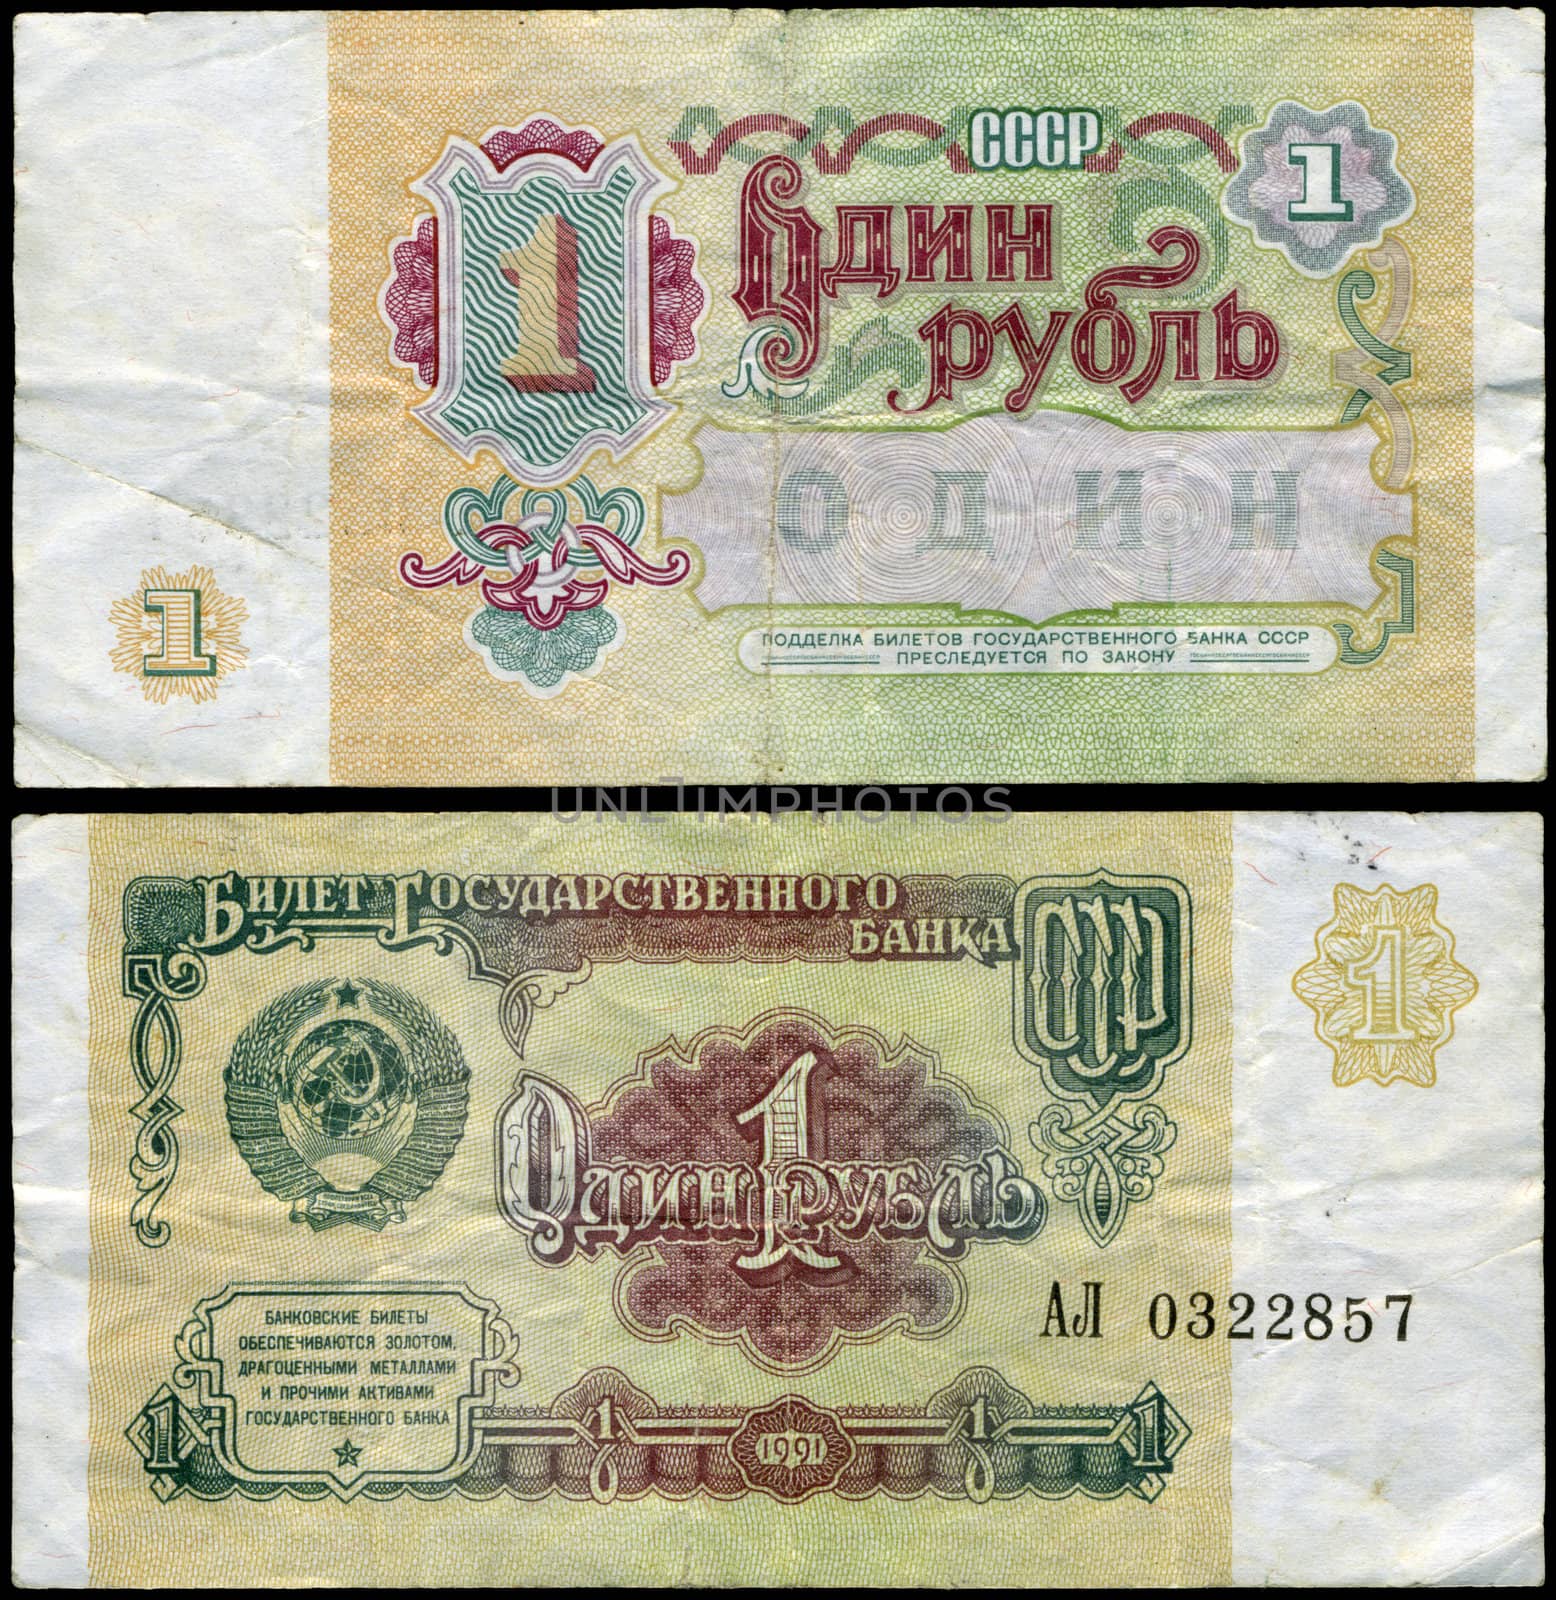 Front and back side of Soviet bank note worth 1 rouble, dating from 1991.
